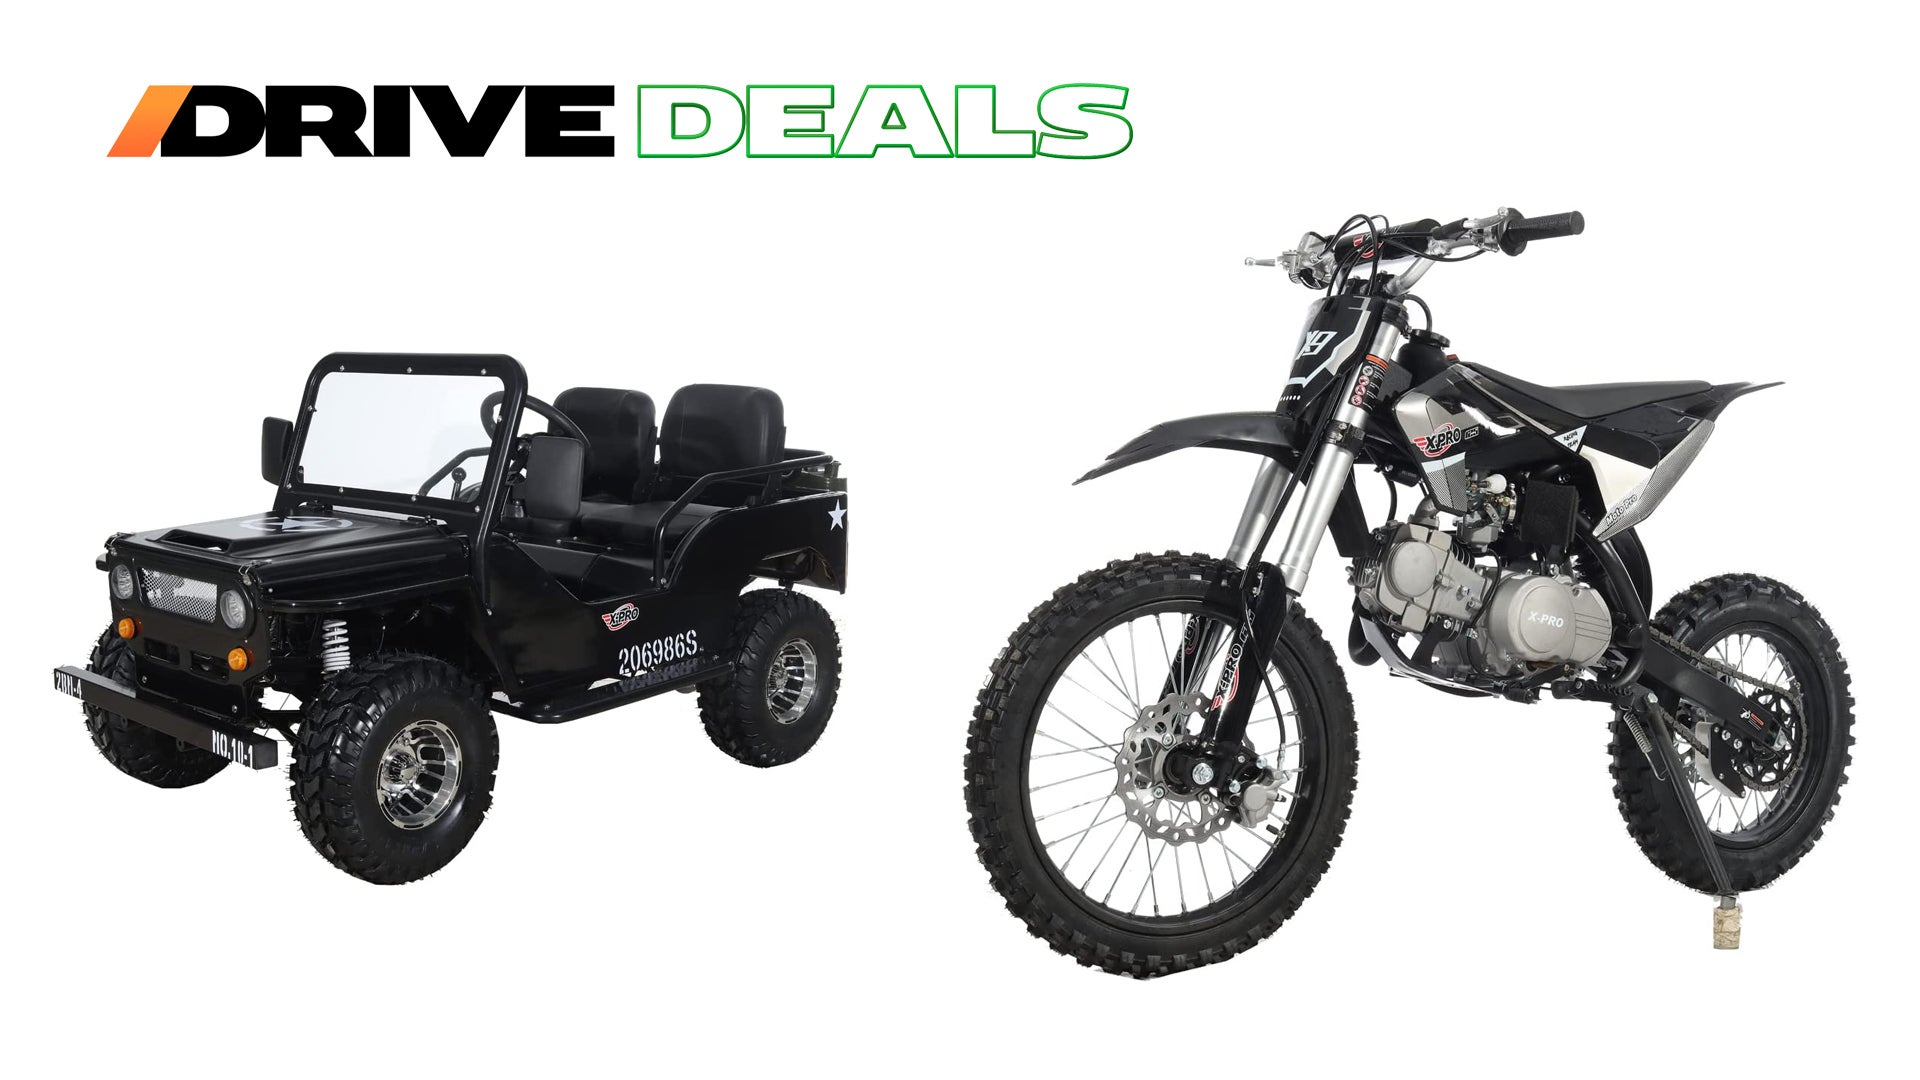 Amazons X-Pro Dirt Bikes and ATVs Are All On Sale This Prime Day